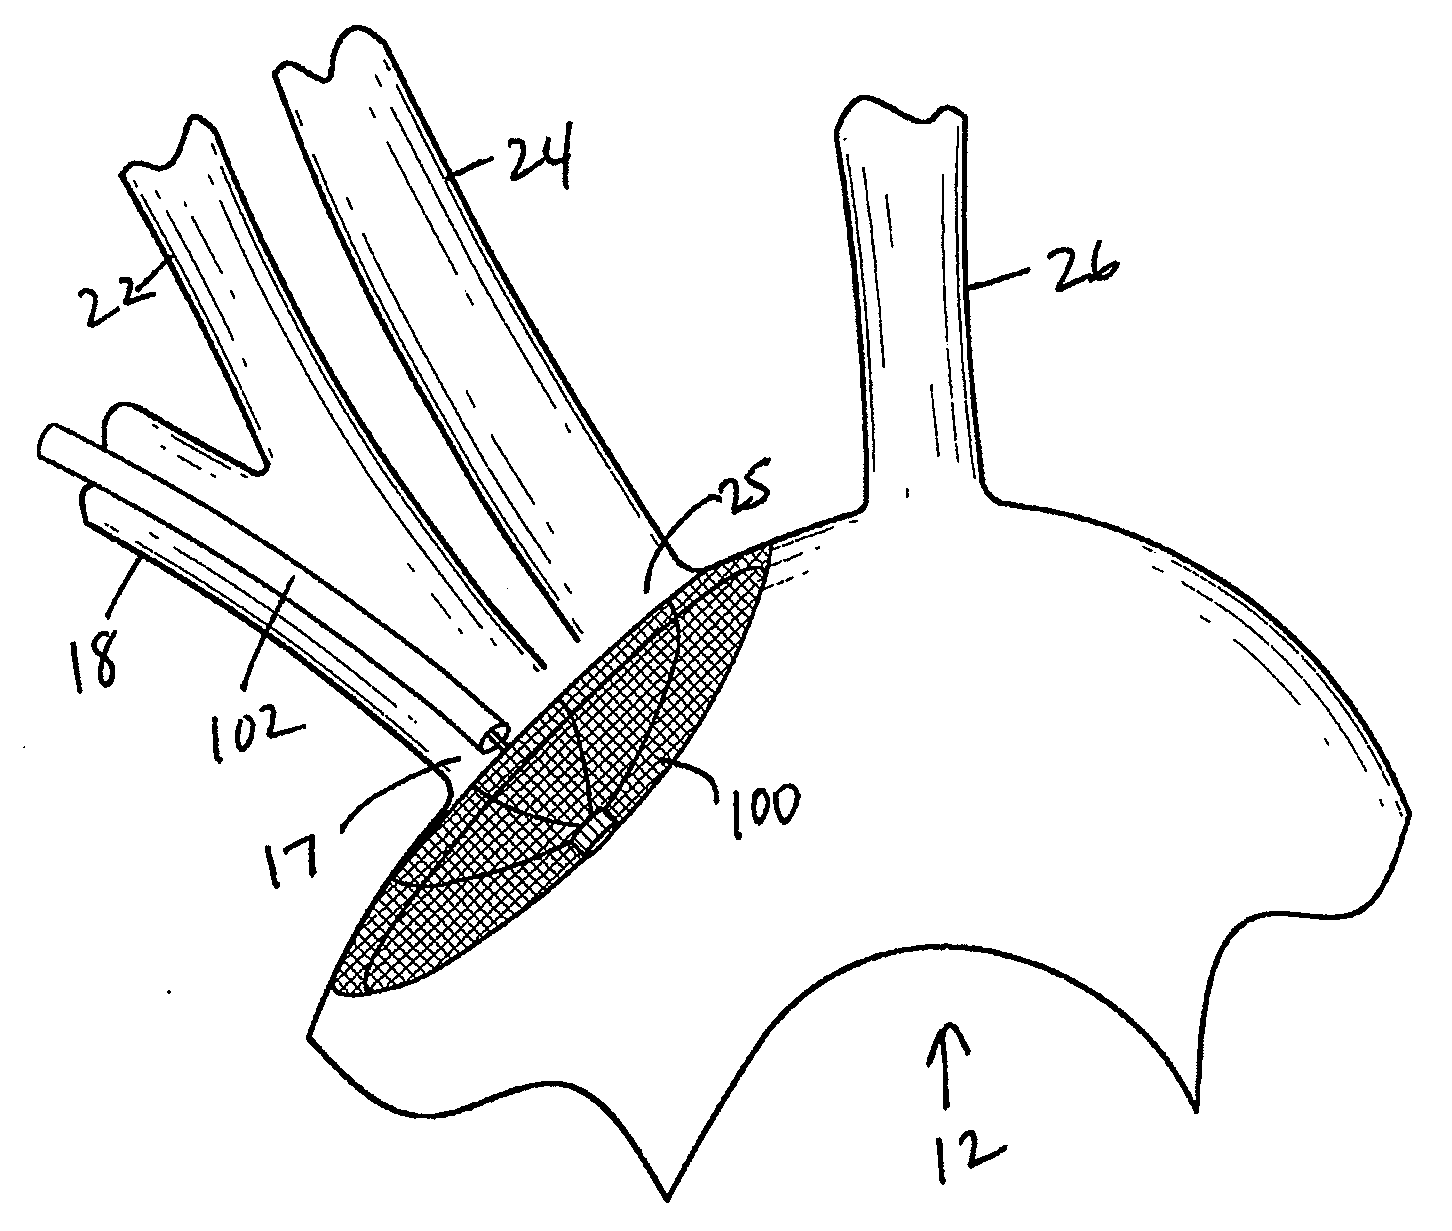 Methods of deploying and retrieving an embolic diversion device